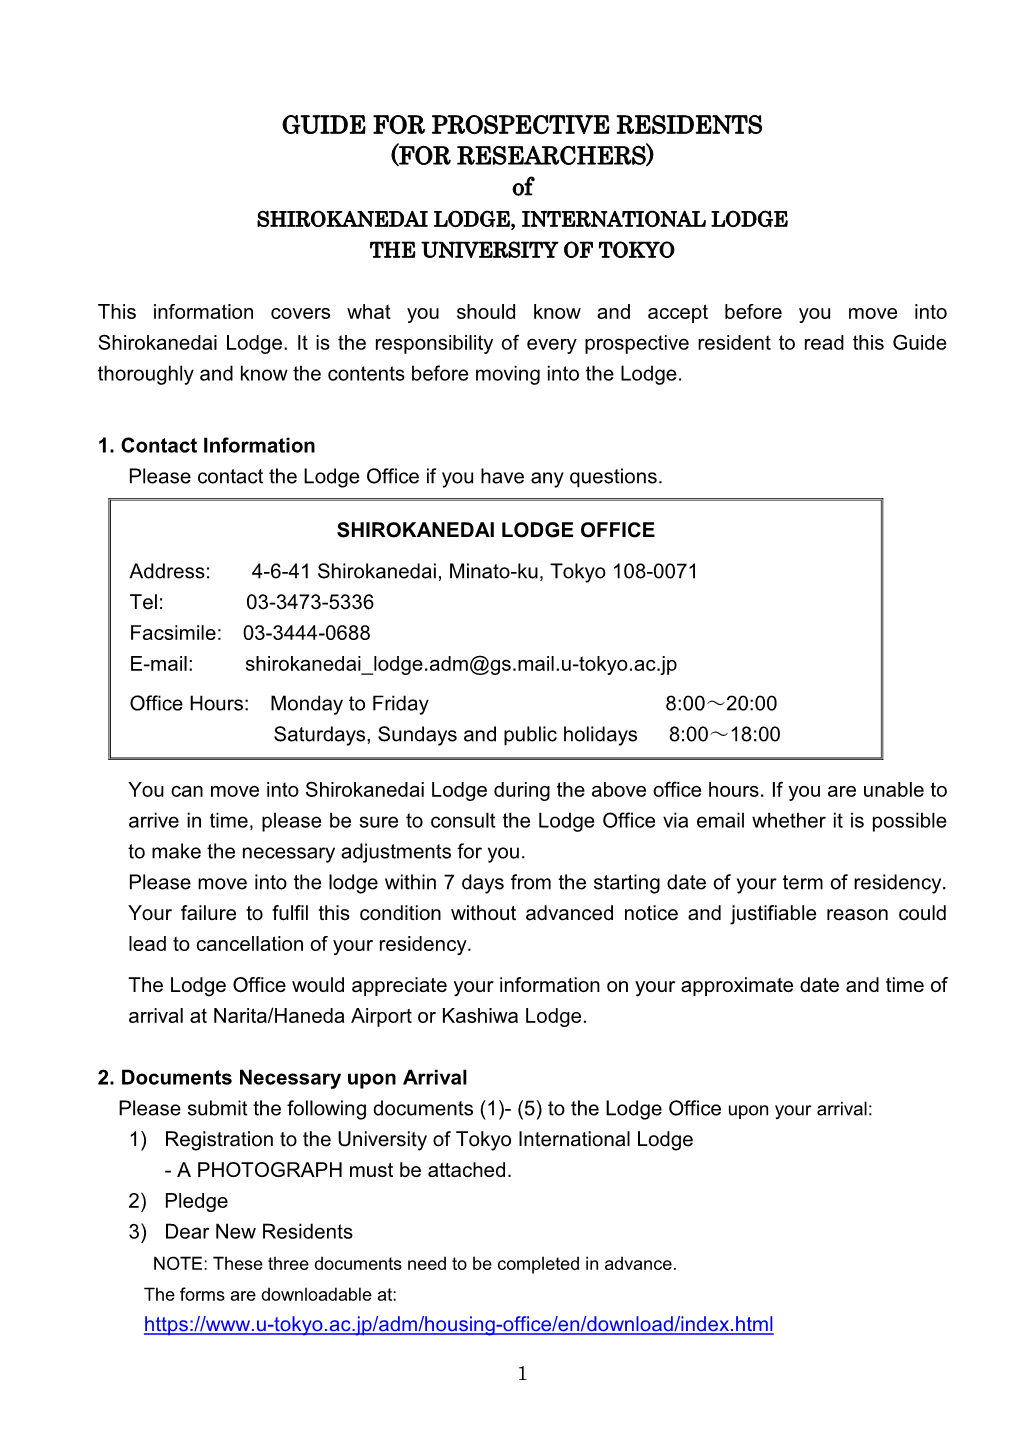 GUIDE for PROSPECTIVE RESIDENTS (FOR RESEARCHERS) of SHIROKANEDAI LODGE, INTERNATIONAL LODGE the UNIVERSITY of TOKYO